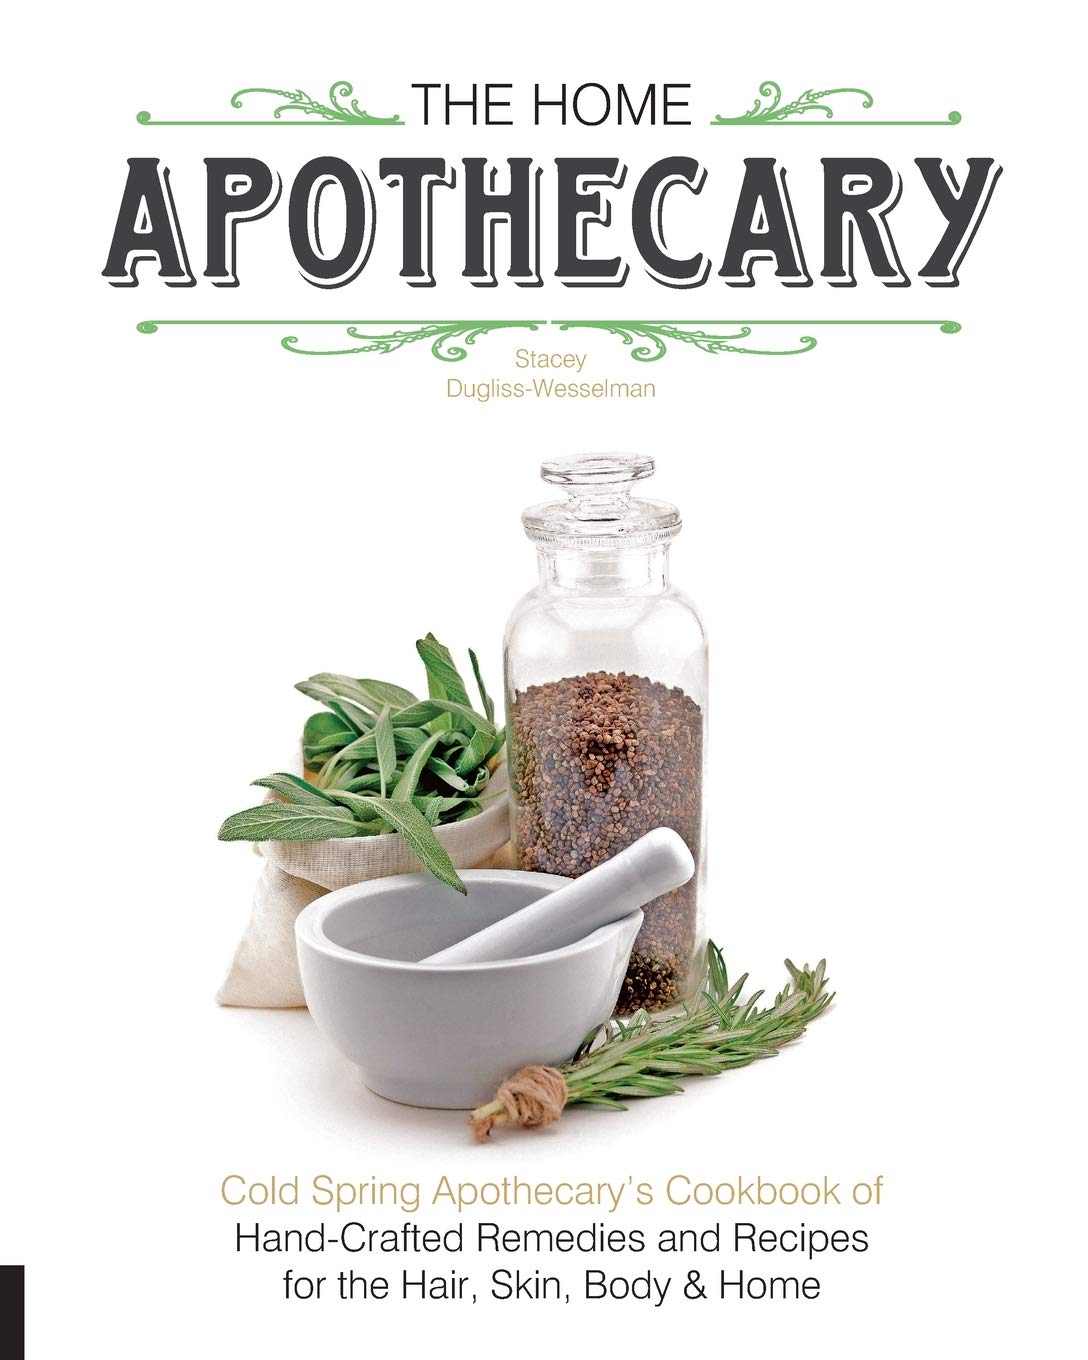 The Home Apothecary: Cold Spring Apothecary's Cookbook of Hand-Crafted Remedies %26 Recipes for the Hair, Skin, Body, and Home